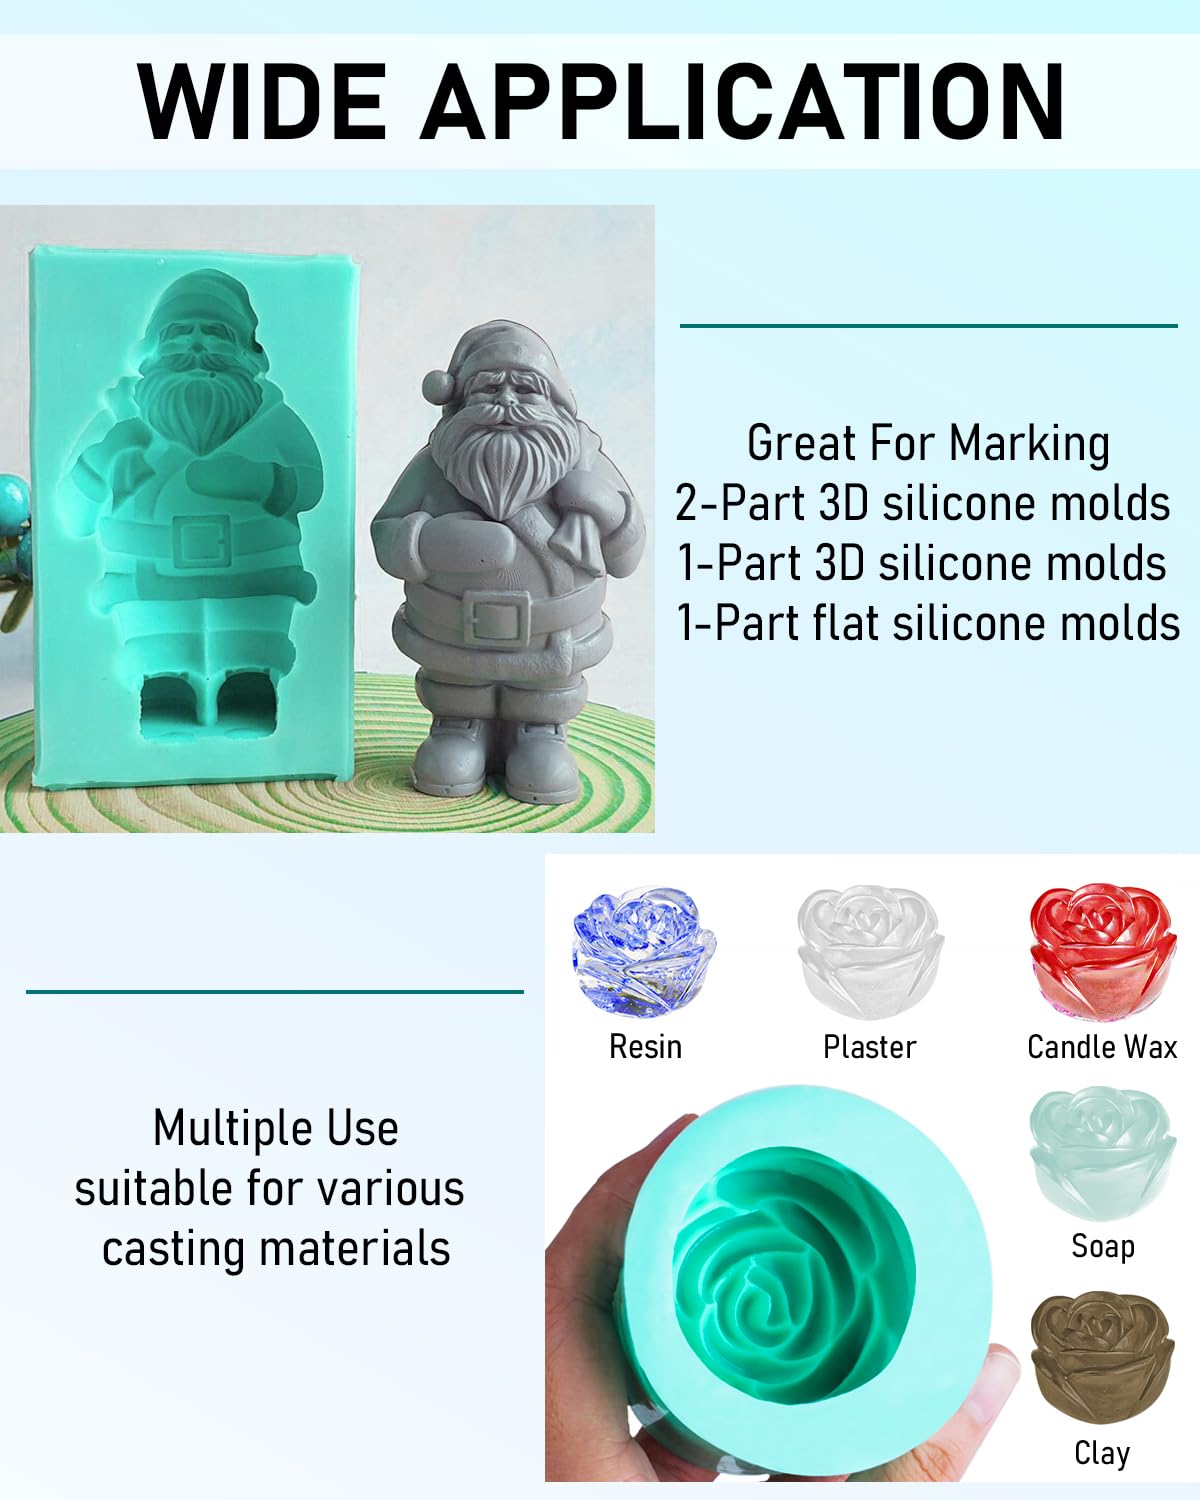 Nicpro 74oz Silicone Mold Making Kit, Platinum Liquid Silicone Rubber for Mold Maker, Jade Green Flexible & Food Safe Mix Ratio 1:1 for Casting 3D Resins Molds DIY with Mold Housing, Mixing Cups